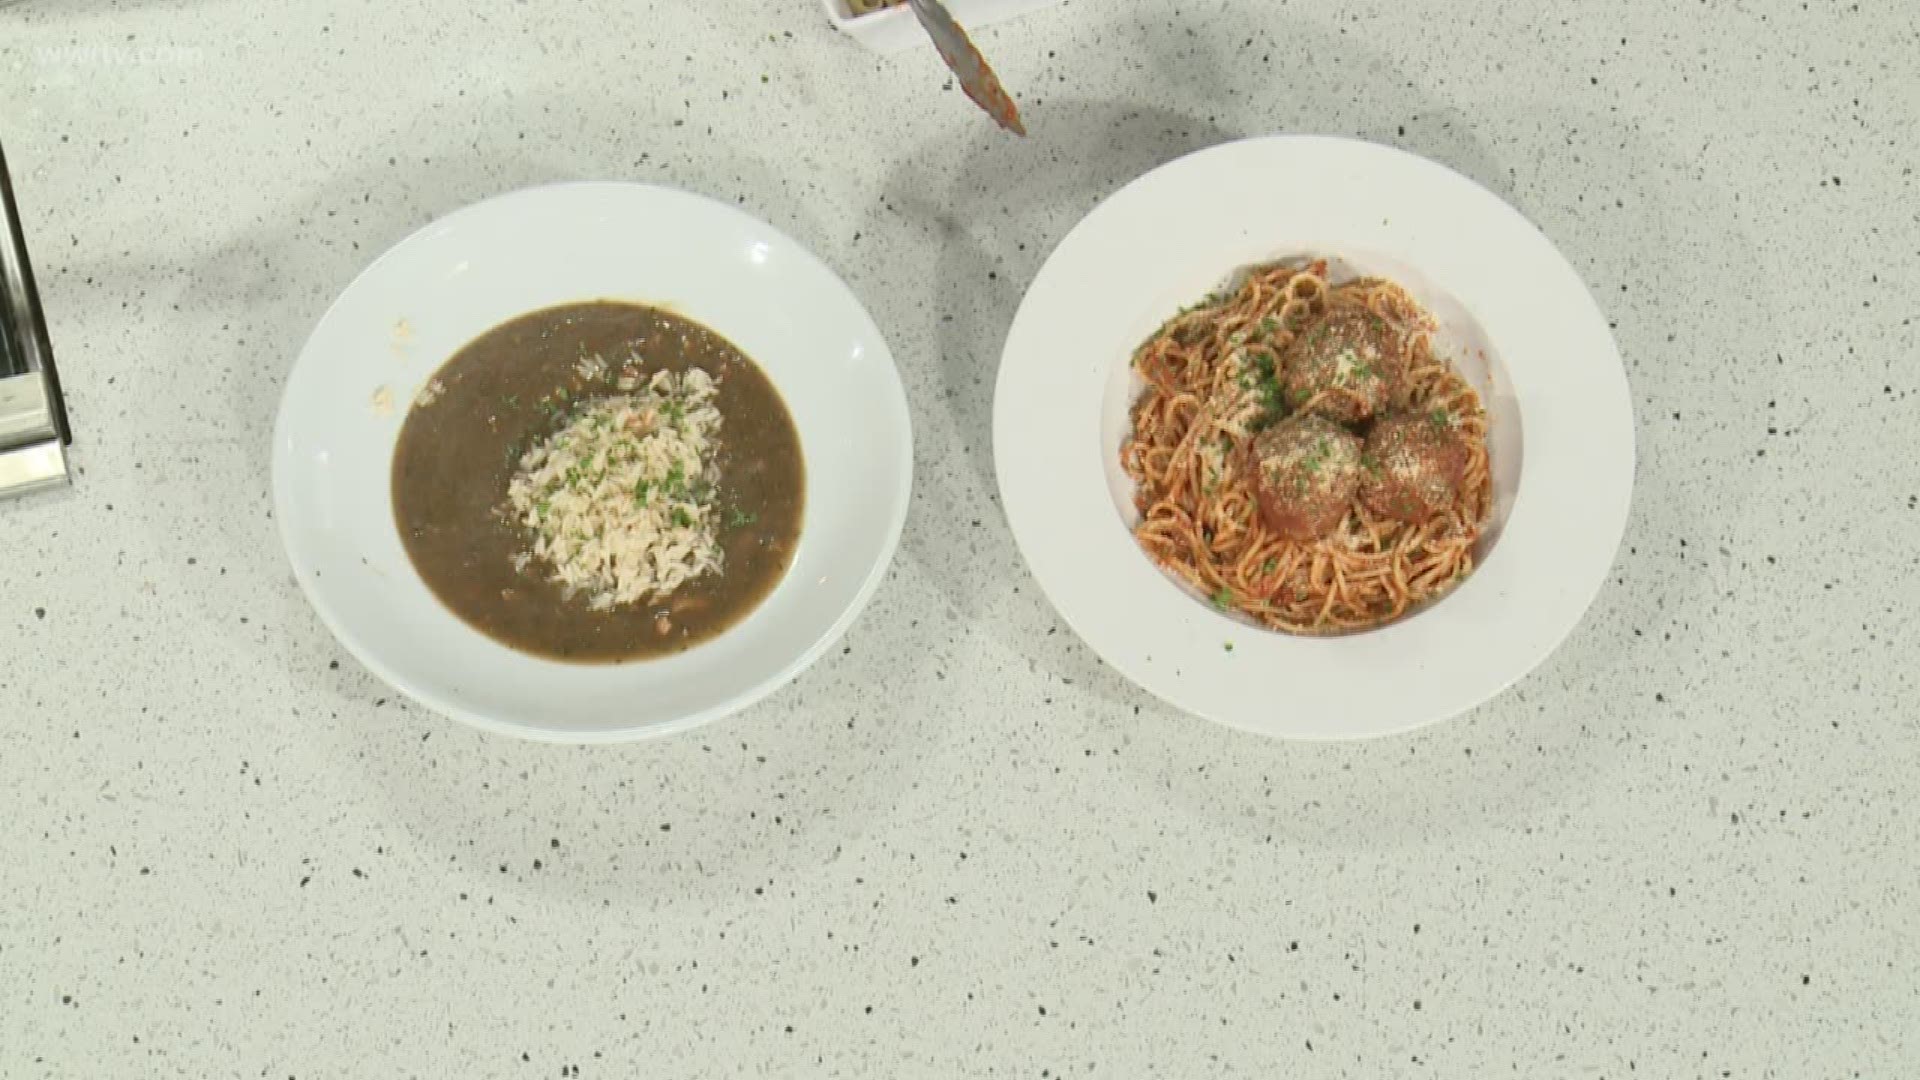 Chef Duke is keeping us warm with some delicious gumbo and his famous meatballs from his restaurant Dab's on North Hullen.